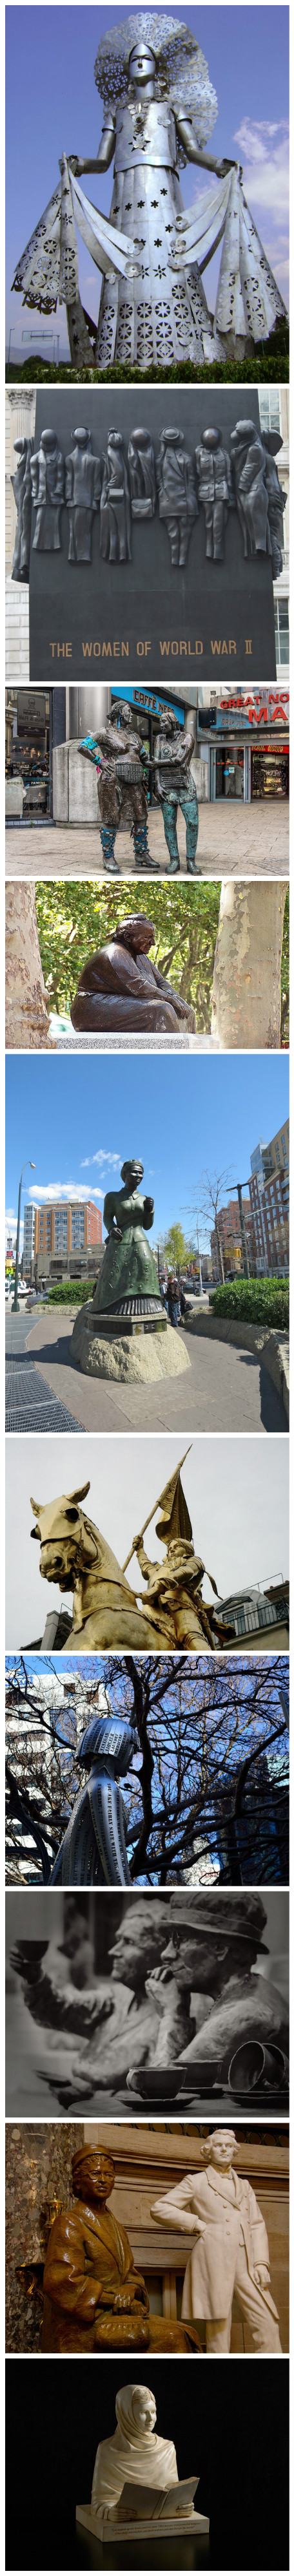 10 Remarkable Statues of Incredible Women